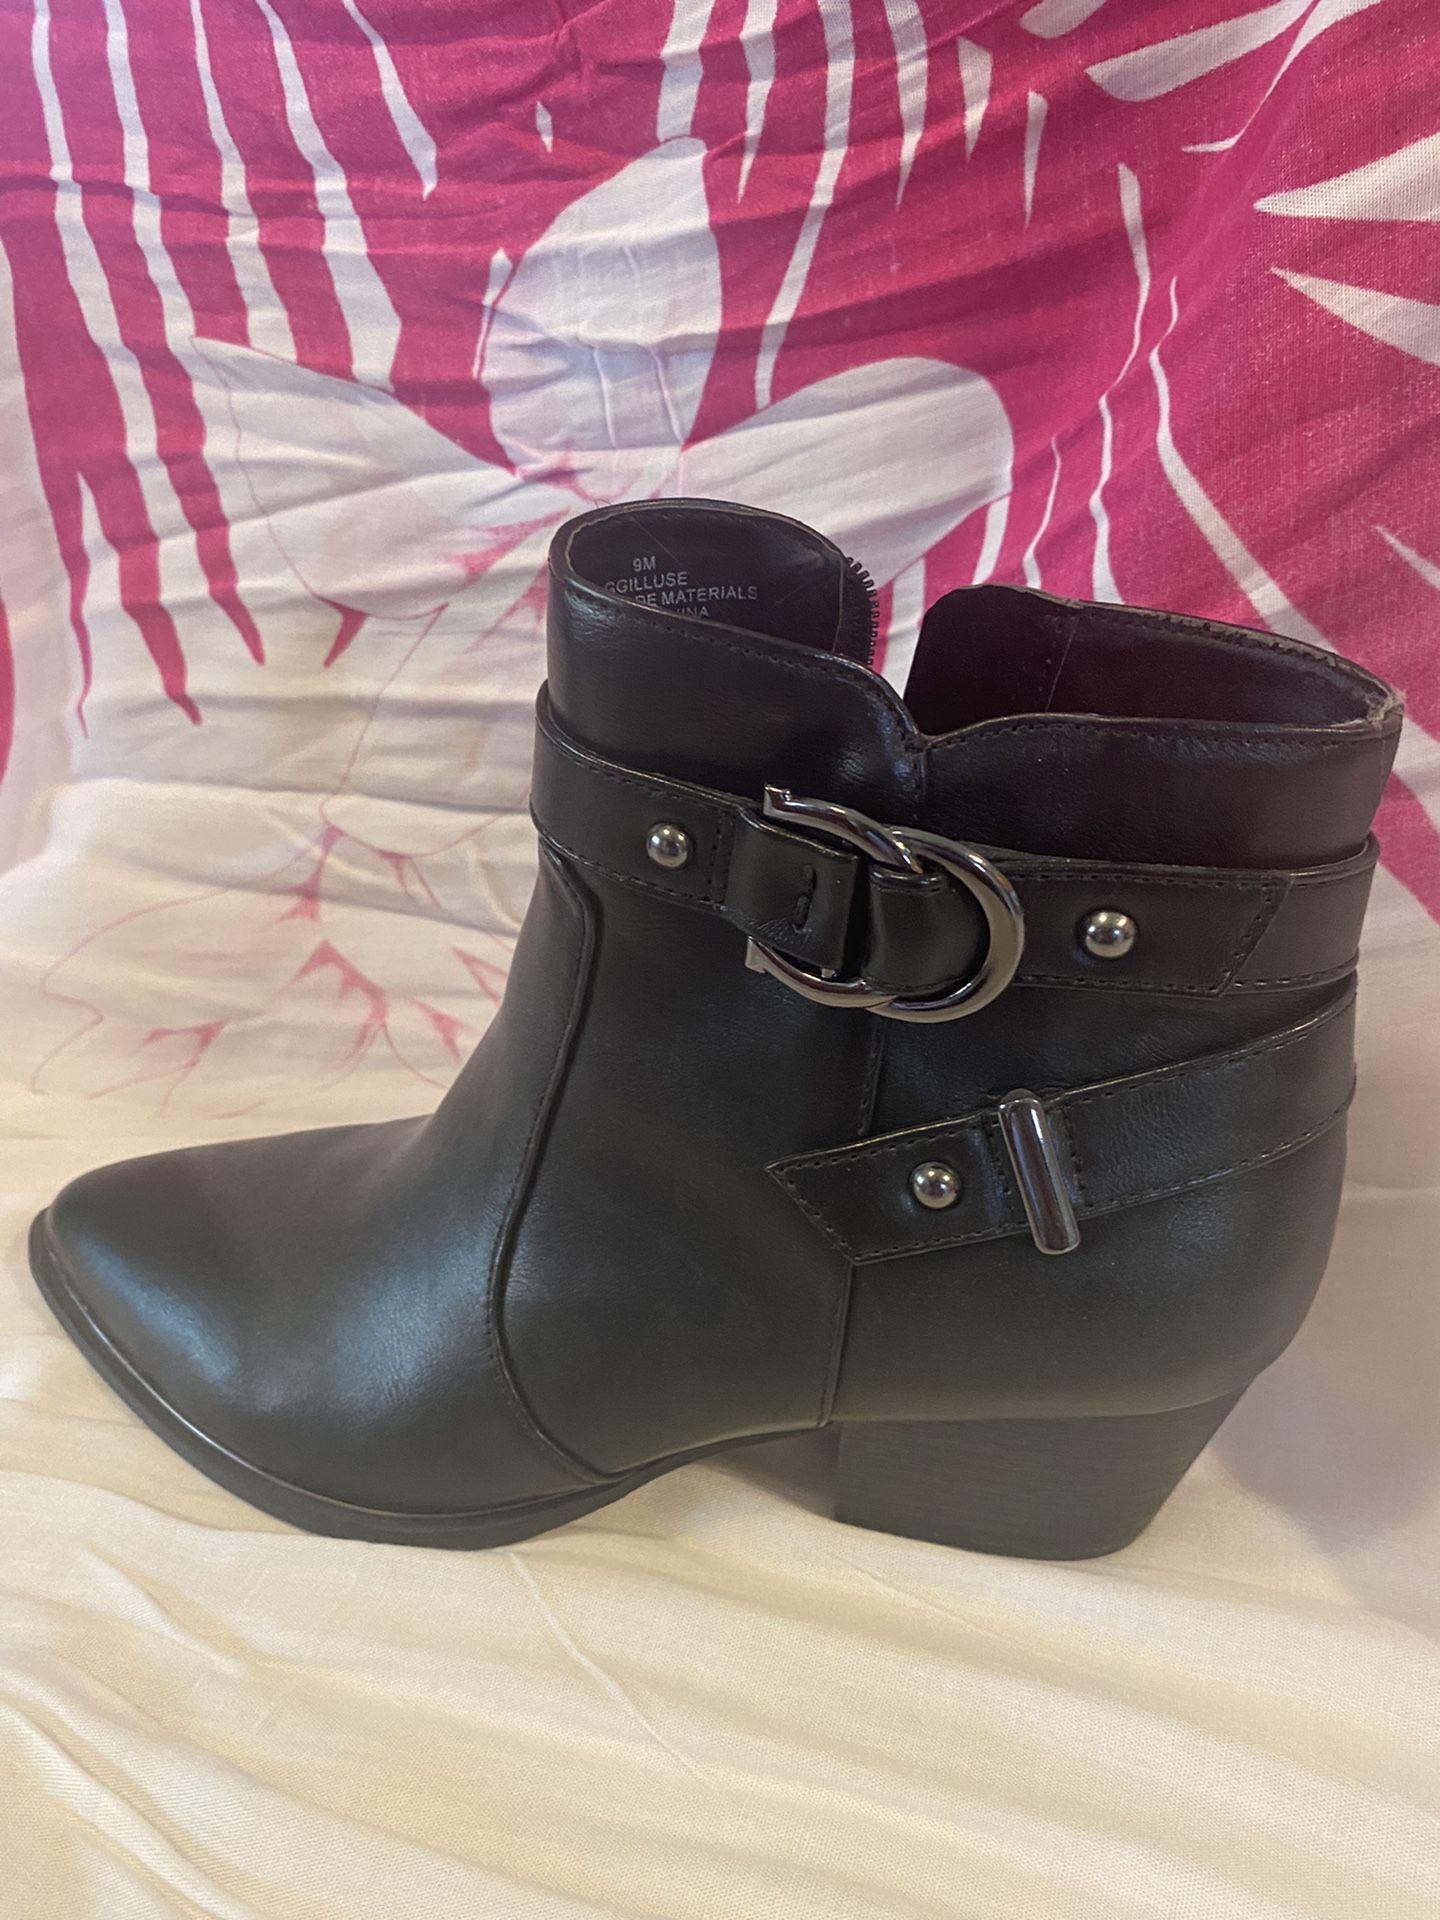 GUESS GBC GGILUSE Ankle Booties Size 9 ***NEW***